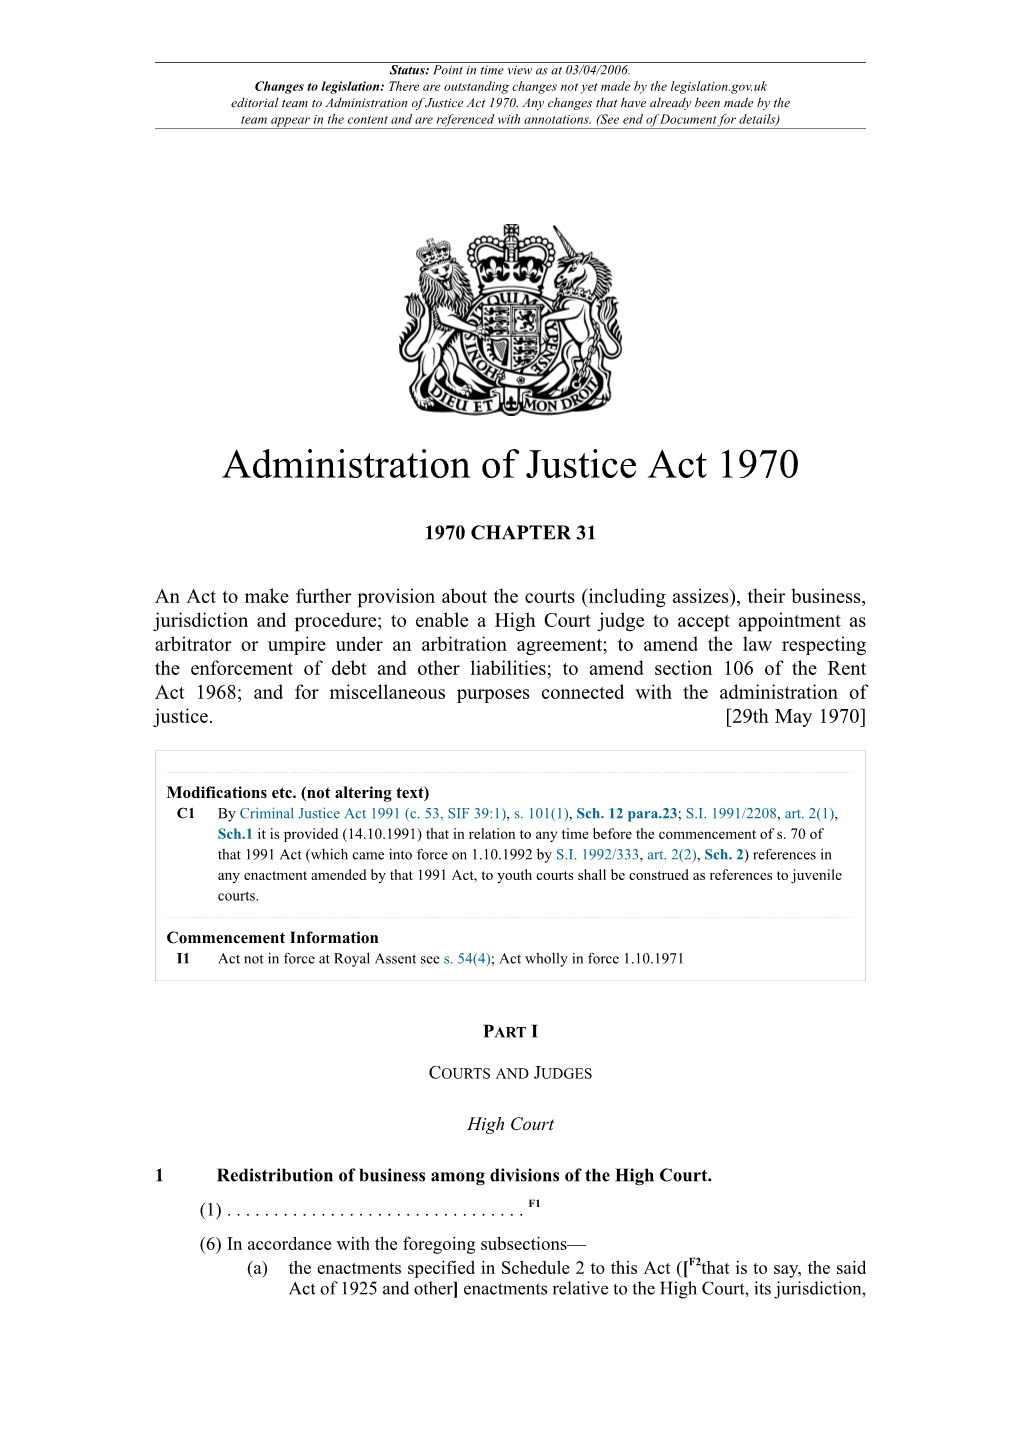 Administration of Justice Act 1970